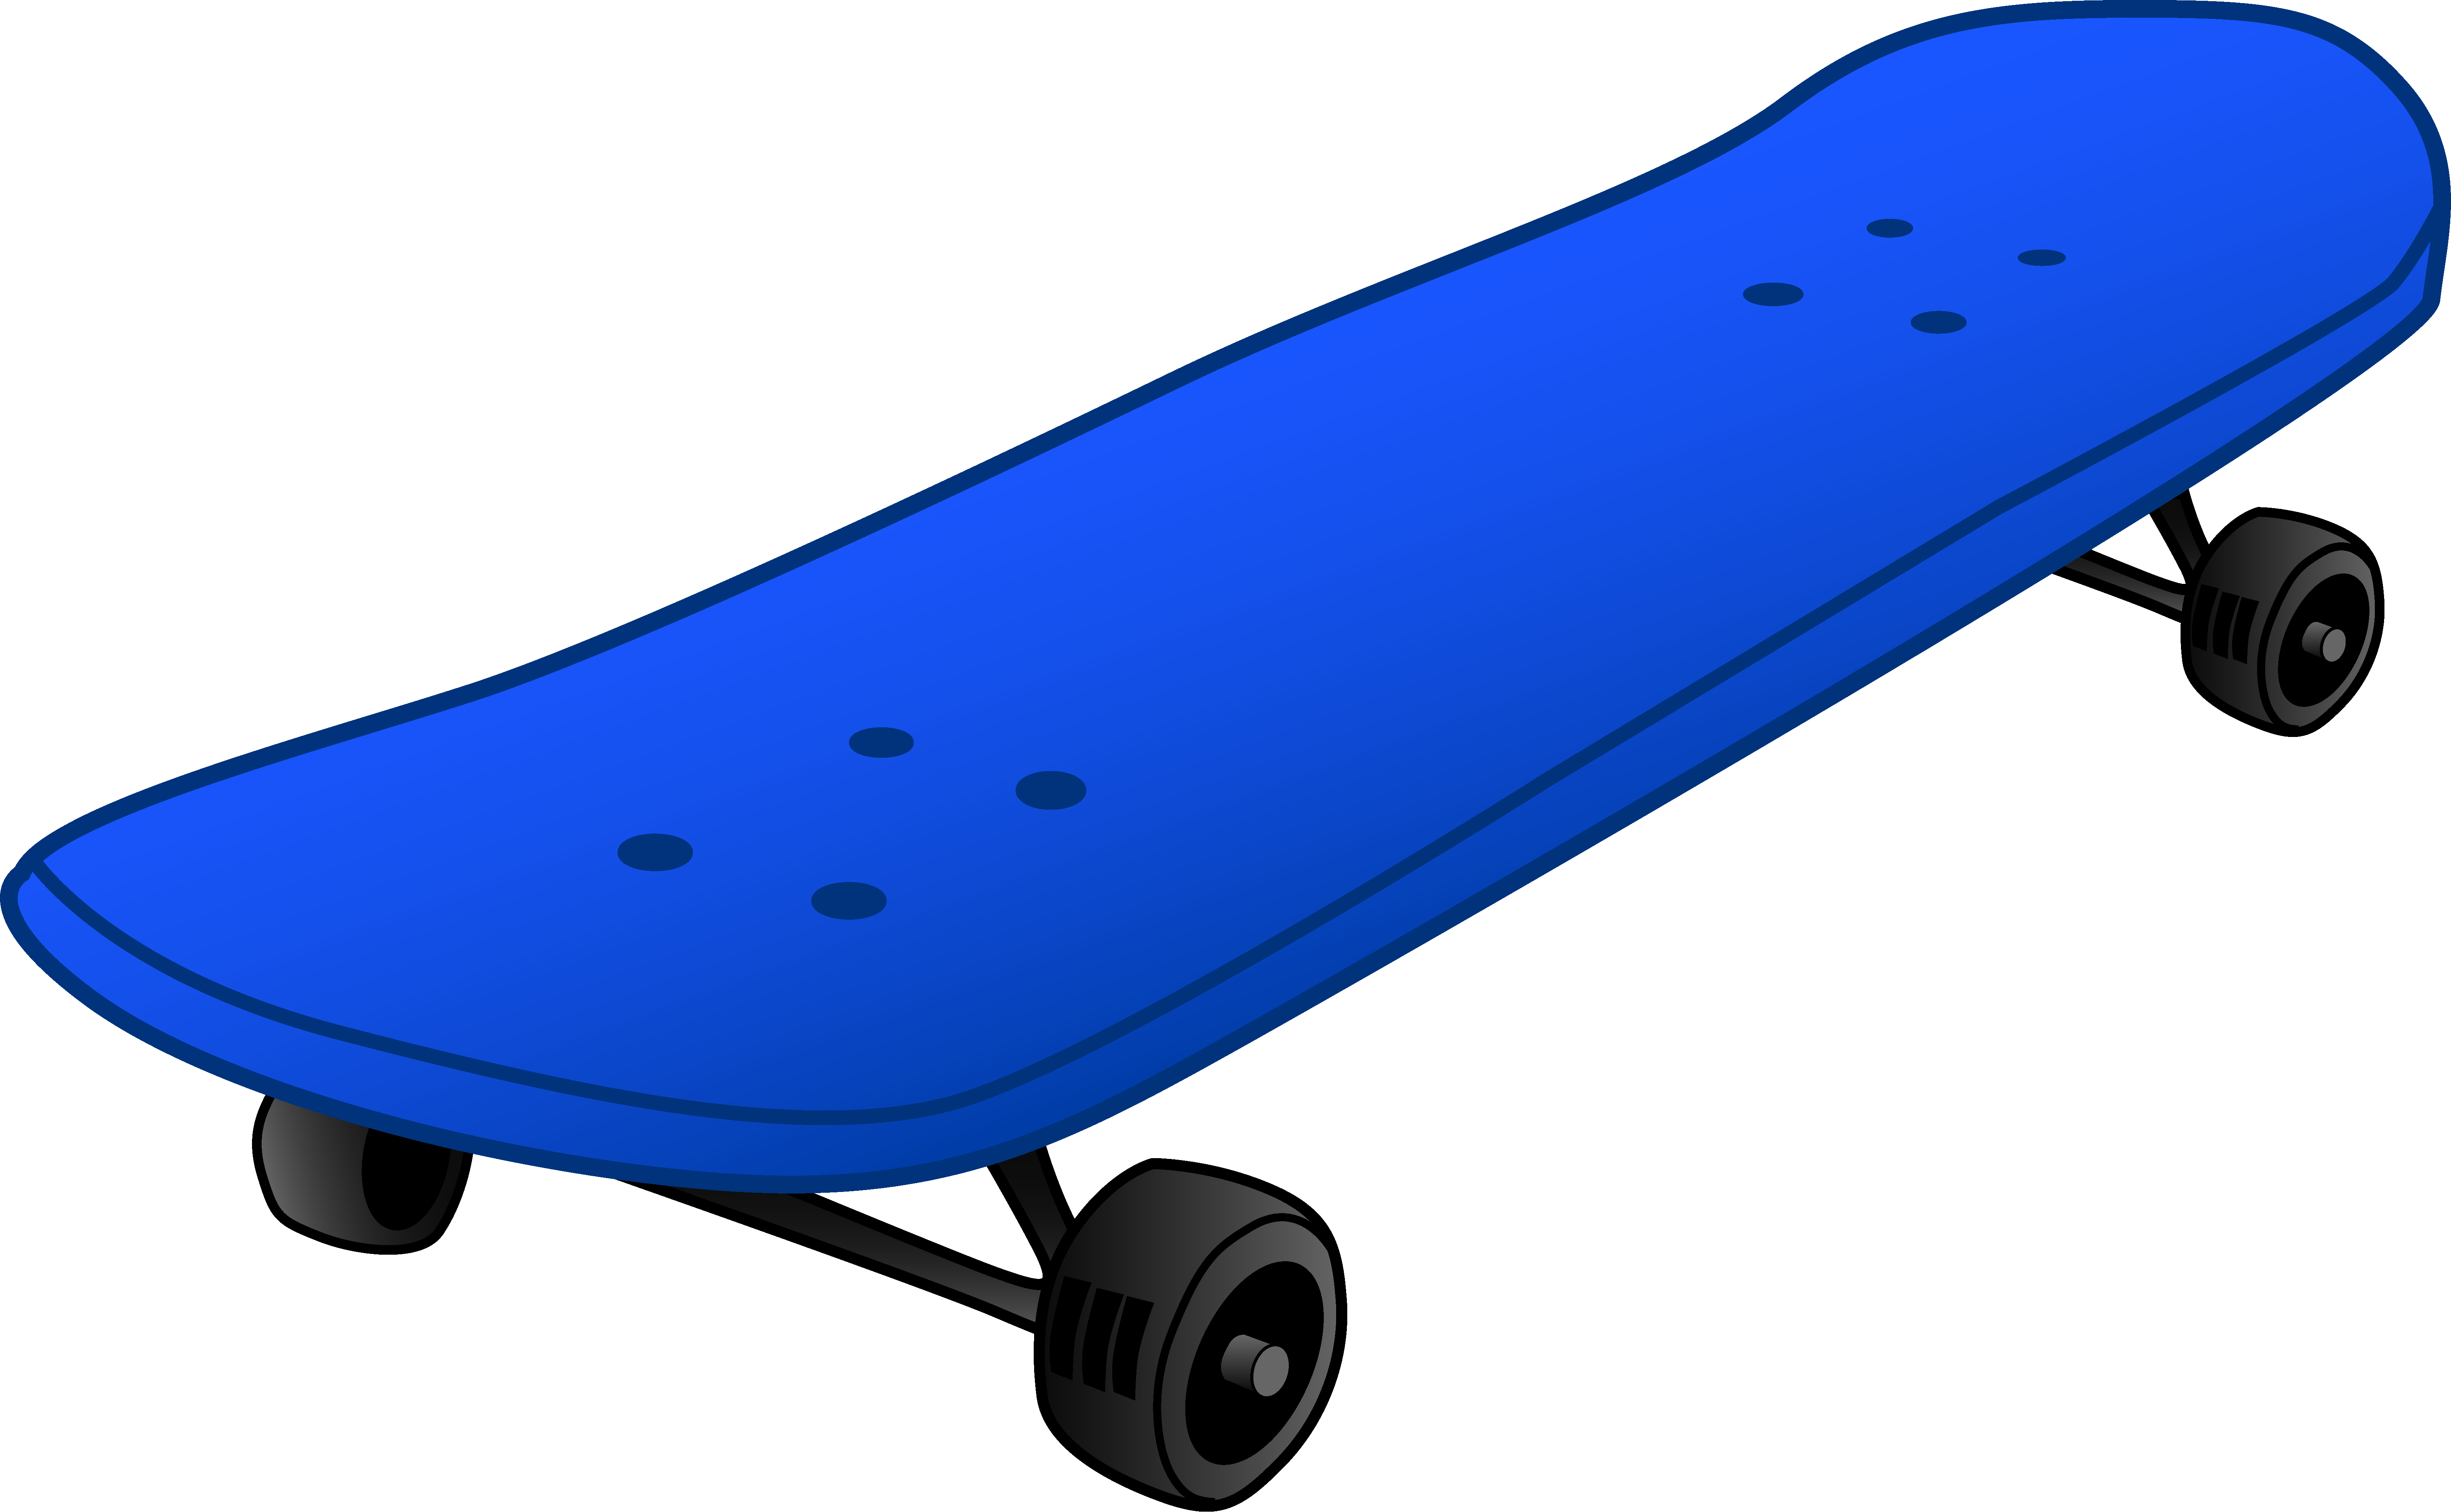 Kateboard clipart #2, Download drawings